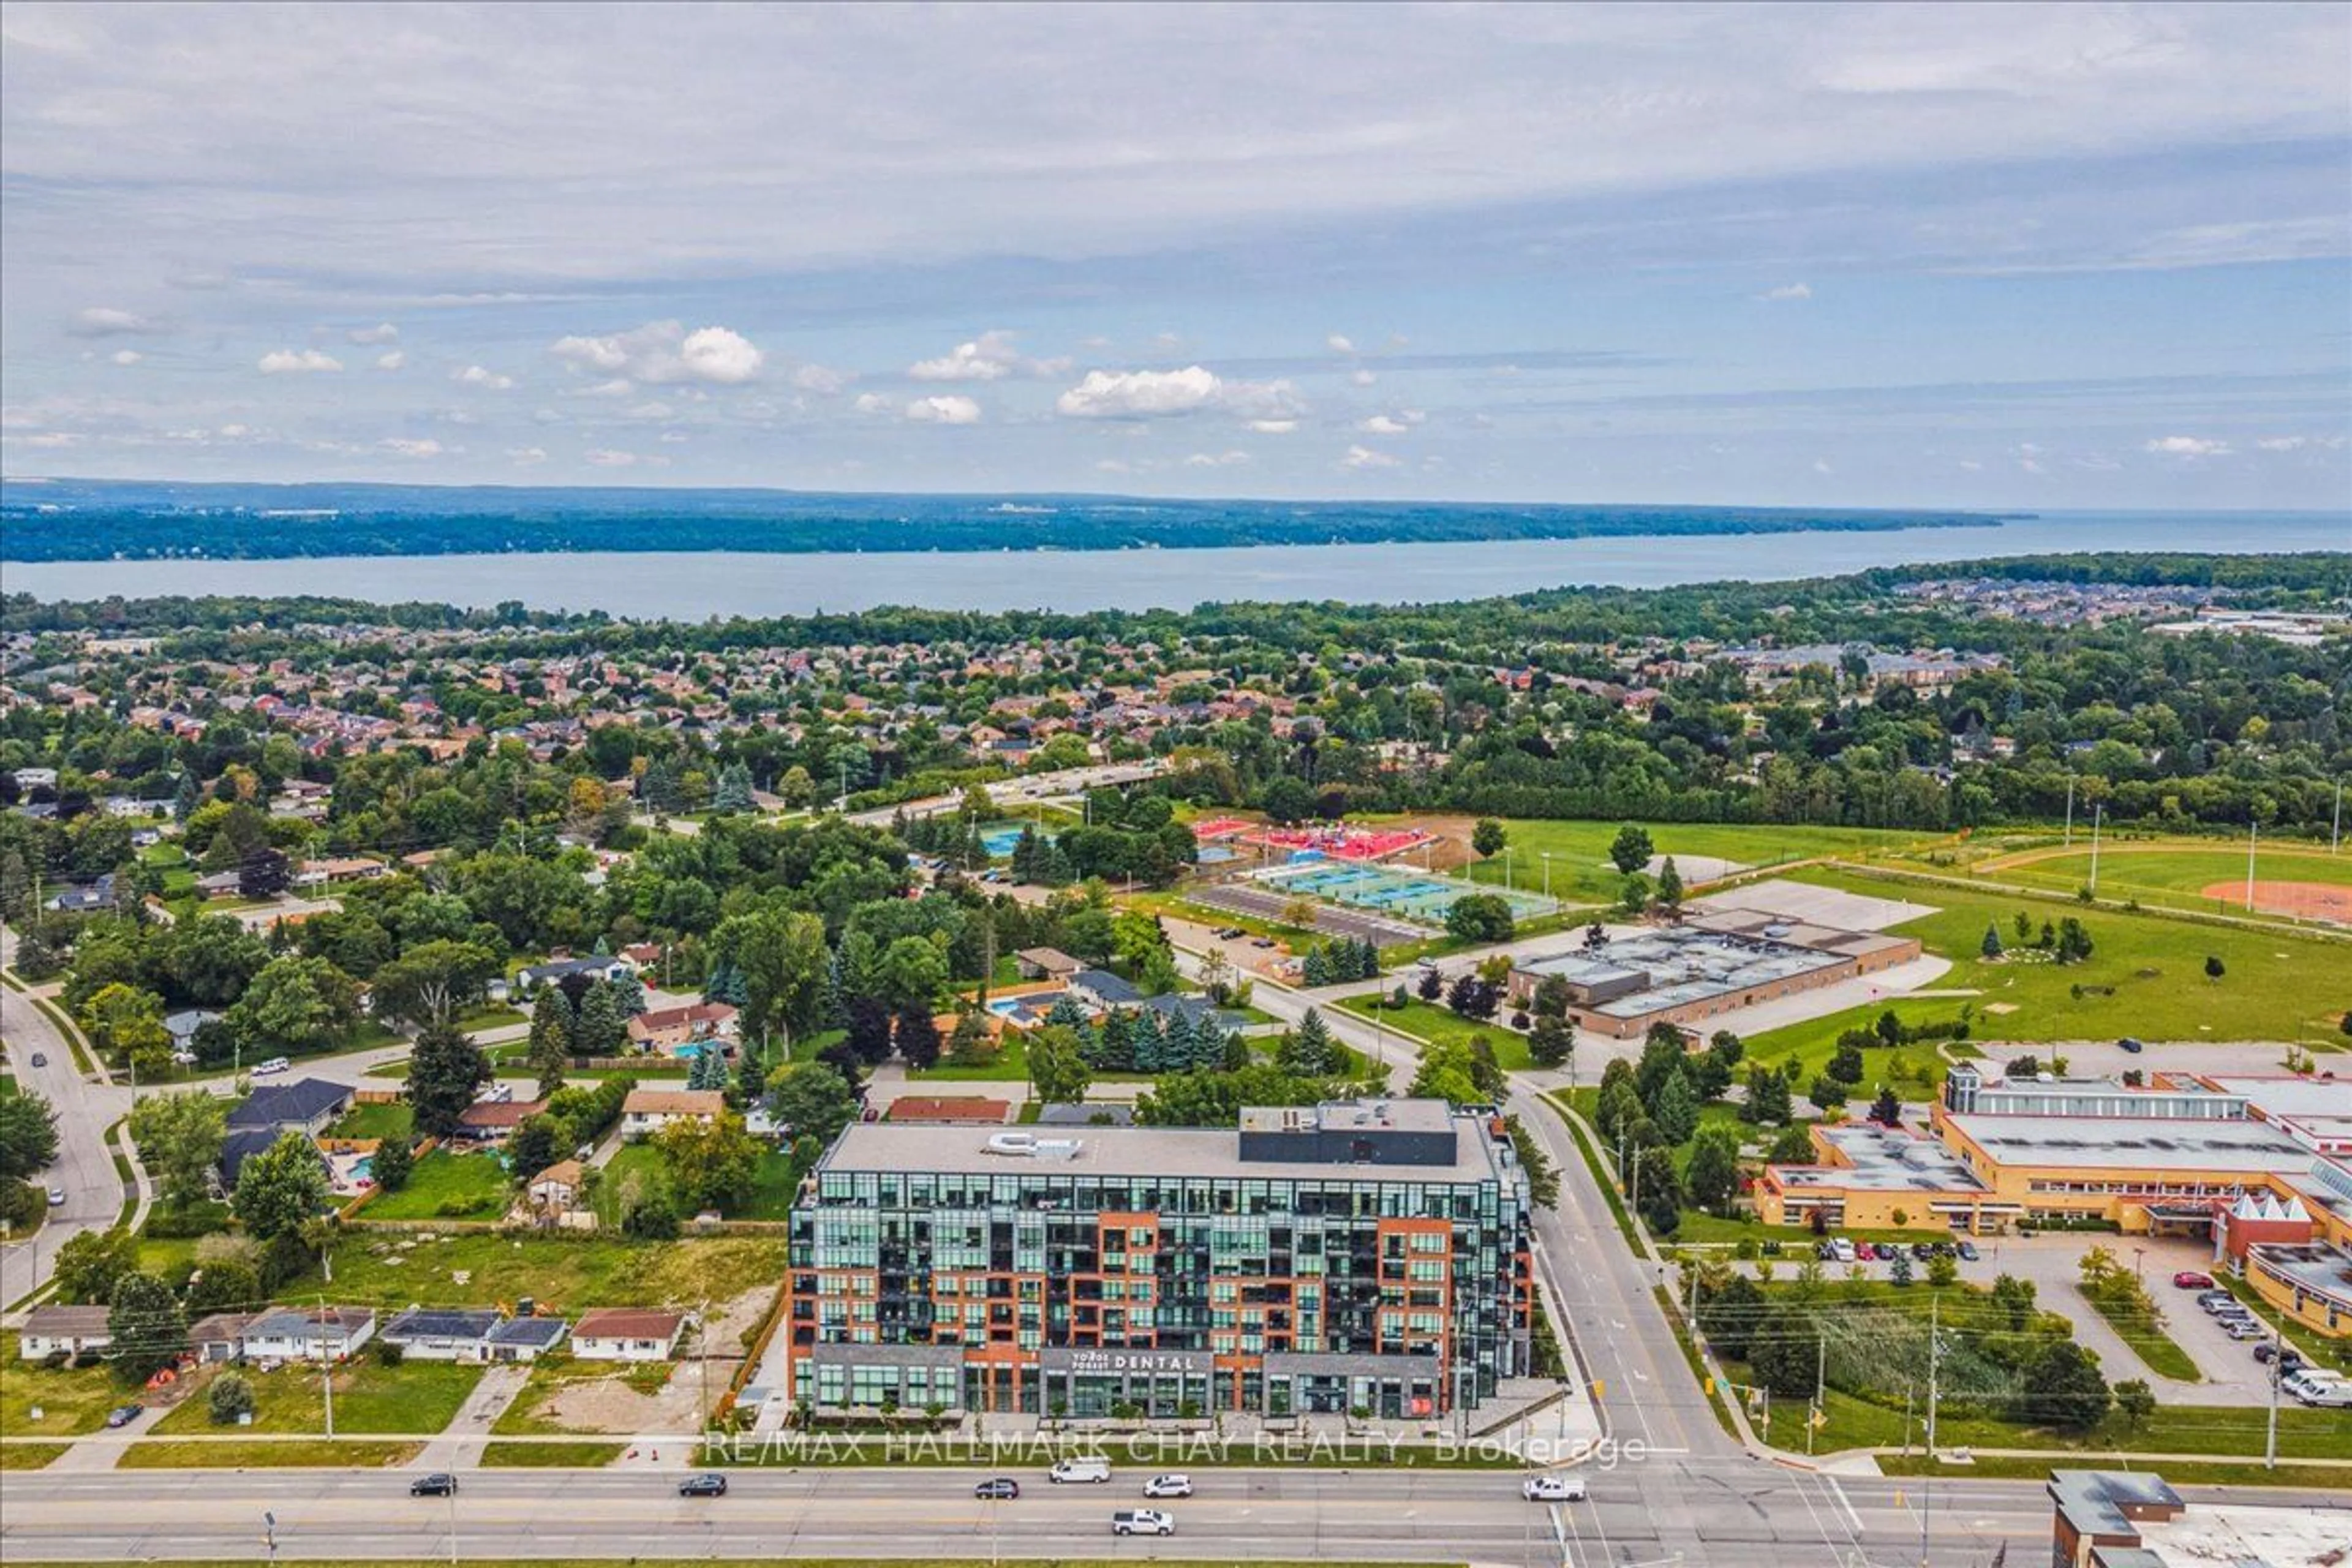 Lakeview for 681 Yonge St #232, Barrie Ontario L4N 4E8